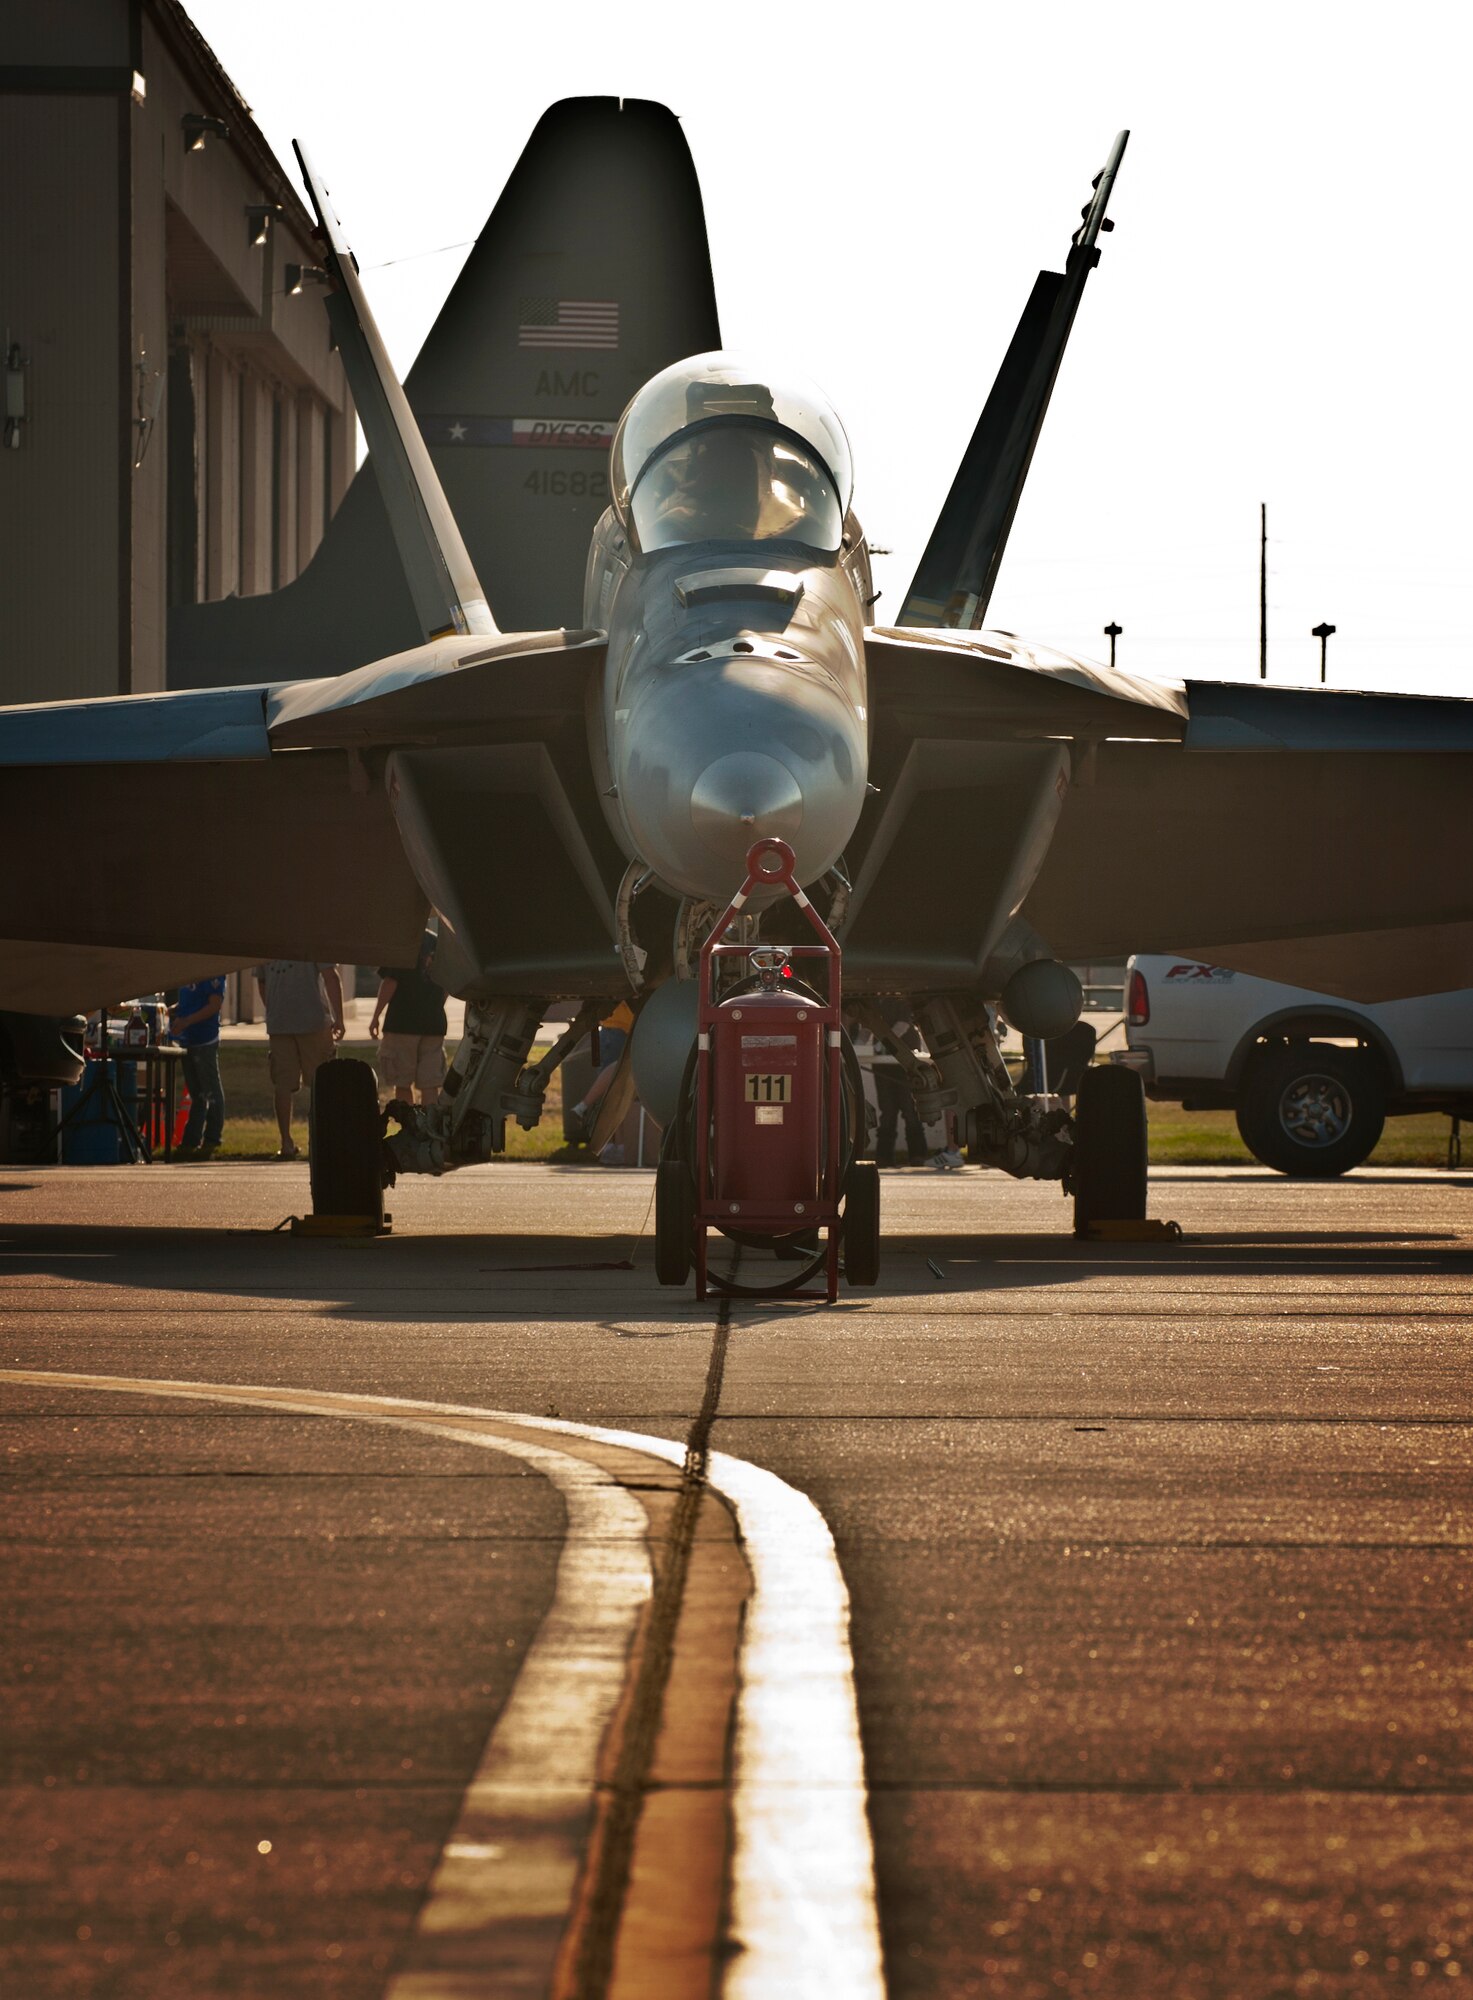 An F-18 Hornet sits on display during the Dyess Big Country Airfest April 28, 2012, at Dyess Air Force Base, Texas. An F-18 is capable of reaching speeds over 1,200 miles per hour and can weigh up to 36,970 pounds when loaded with armaments. (U.S. Air Force photo by Airman 1st Class Jonathan Stefanko/ Released)